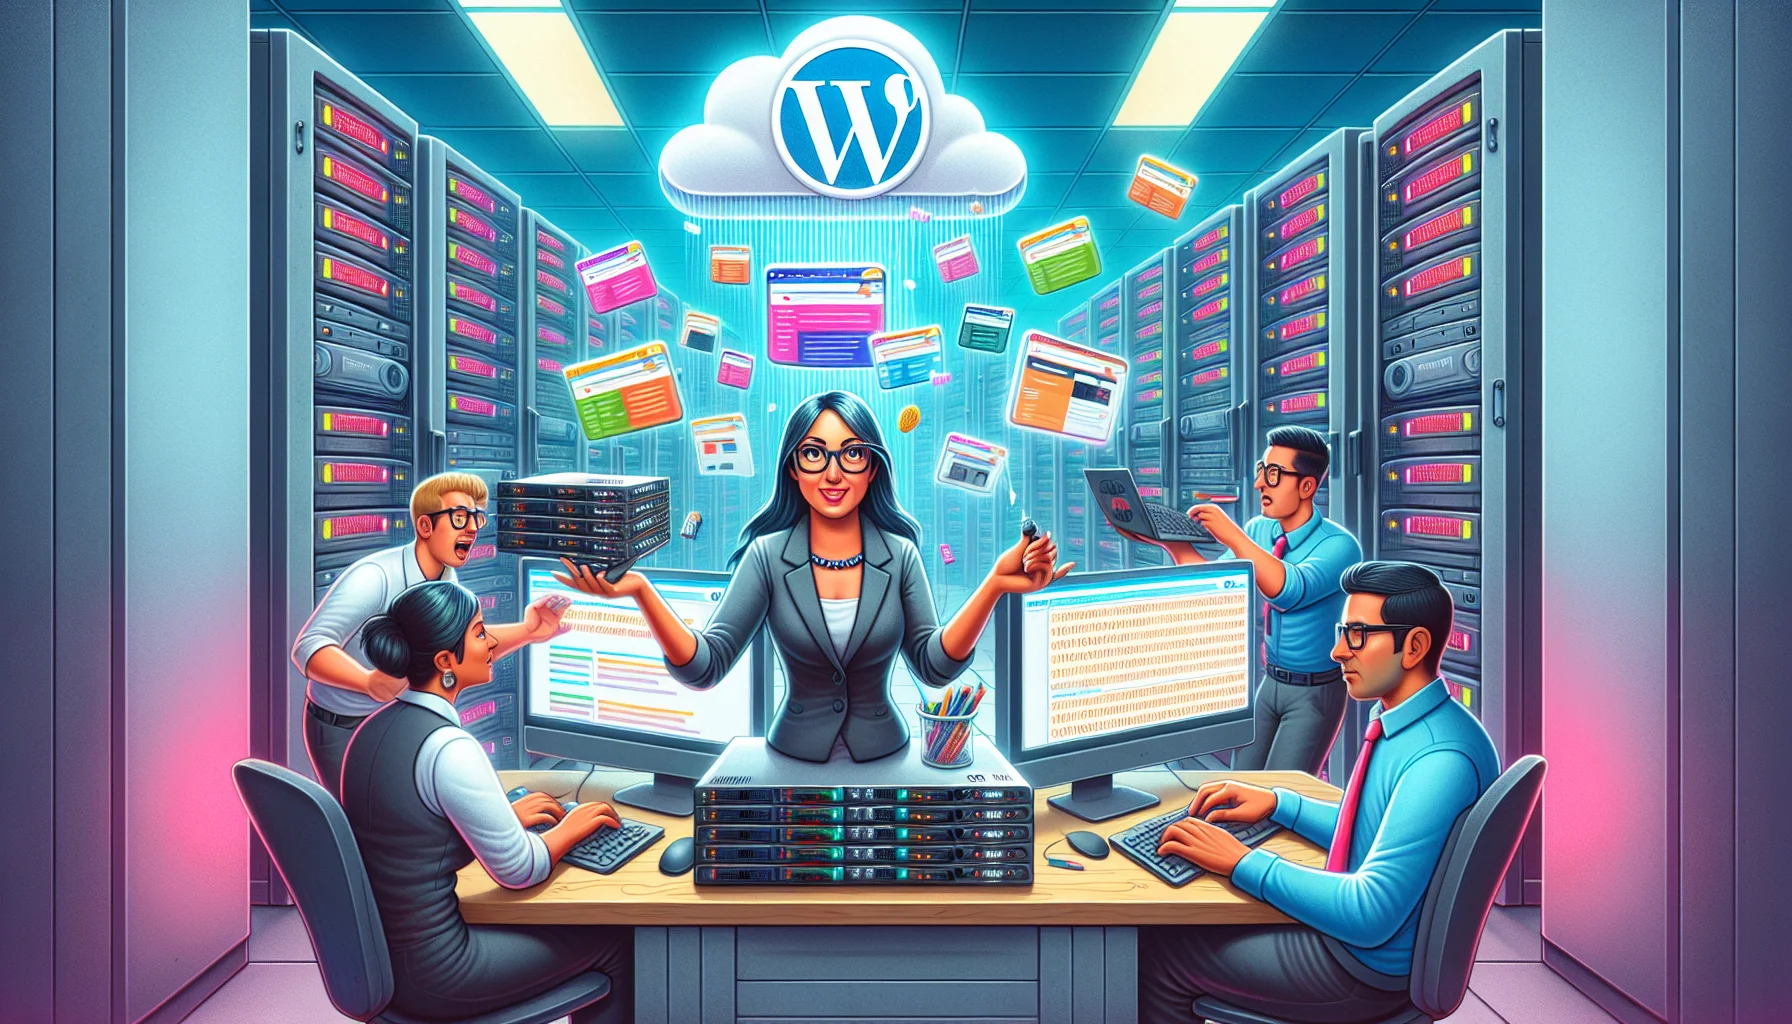 Create a humorous, detailed scene set in an IT department. Some individuals are standing around a large glowing monitor that showcases a WordPress logo. Behind them, servers are buzzing with activity. One person, a Middle-Eastern woman in her 30s, is expertly juggling multiple websites represented as colorful, 3D models of webpages. Another individual, a Hispanic man with glasses, is furiously typing on two keyboards simultaneously with a focused expression, while a white digital cloud hovers above him catching and neatly organizing streams of binary code pouring from above. These elements together represent the concept of managed WordPress hosting: keeping multiple websites, handling high traffic, and data management.